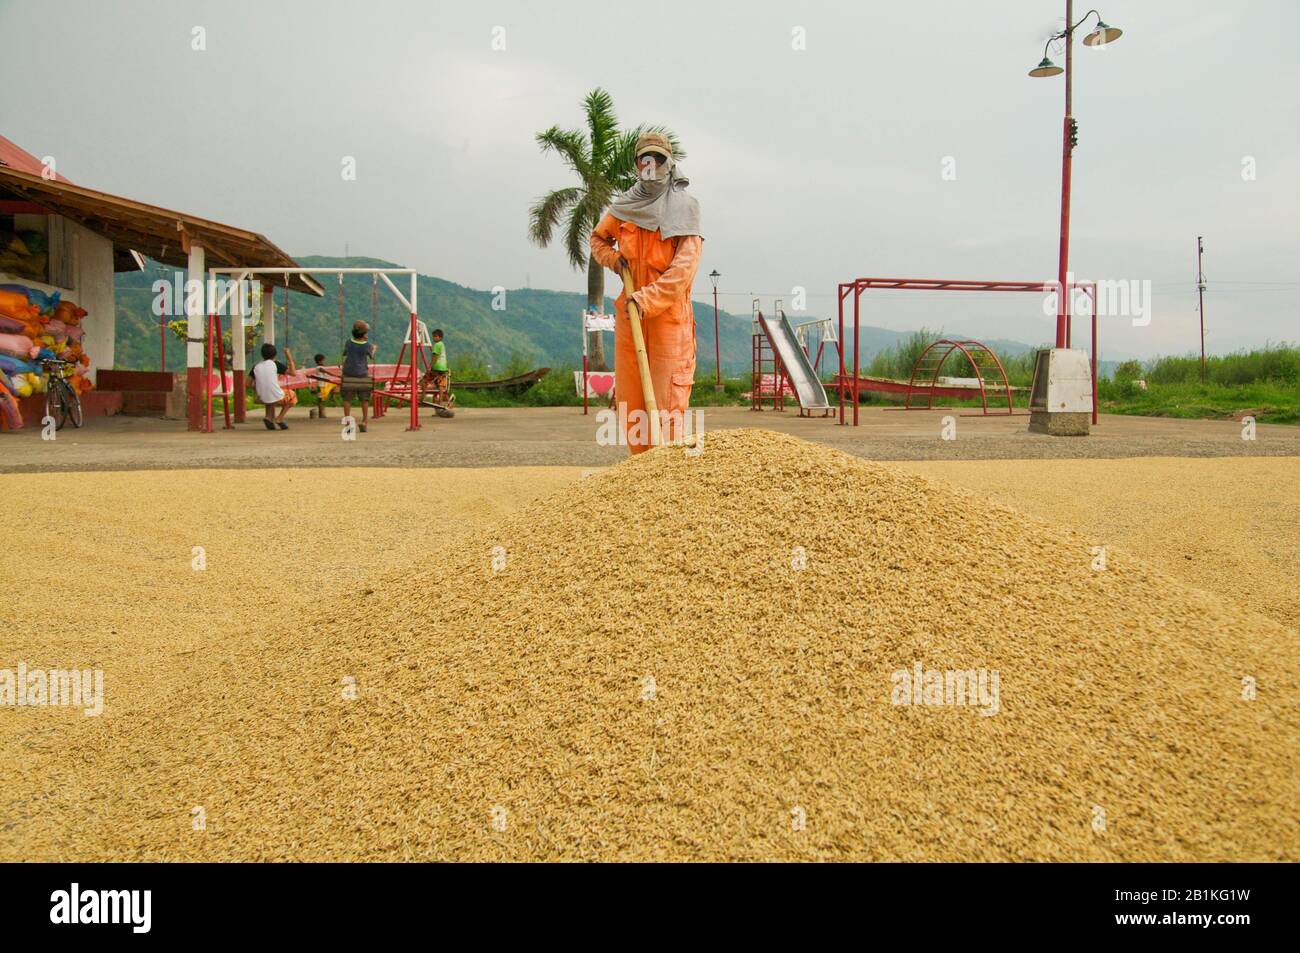 Drying palay or rice husks reduces grain moisture content for safe storage. This is the most critical operation after harvesting a rice crop. Stock Photo